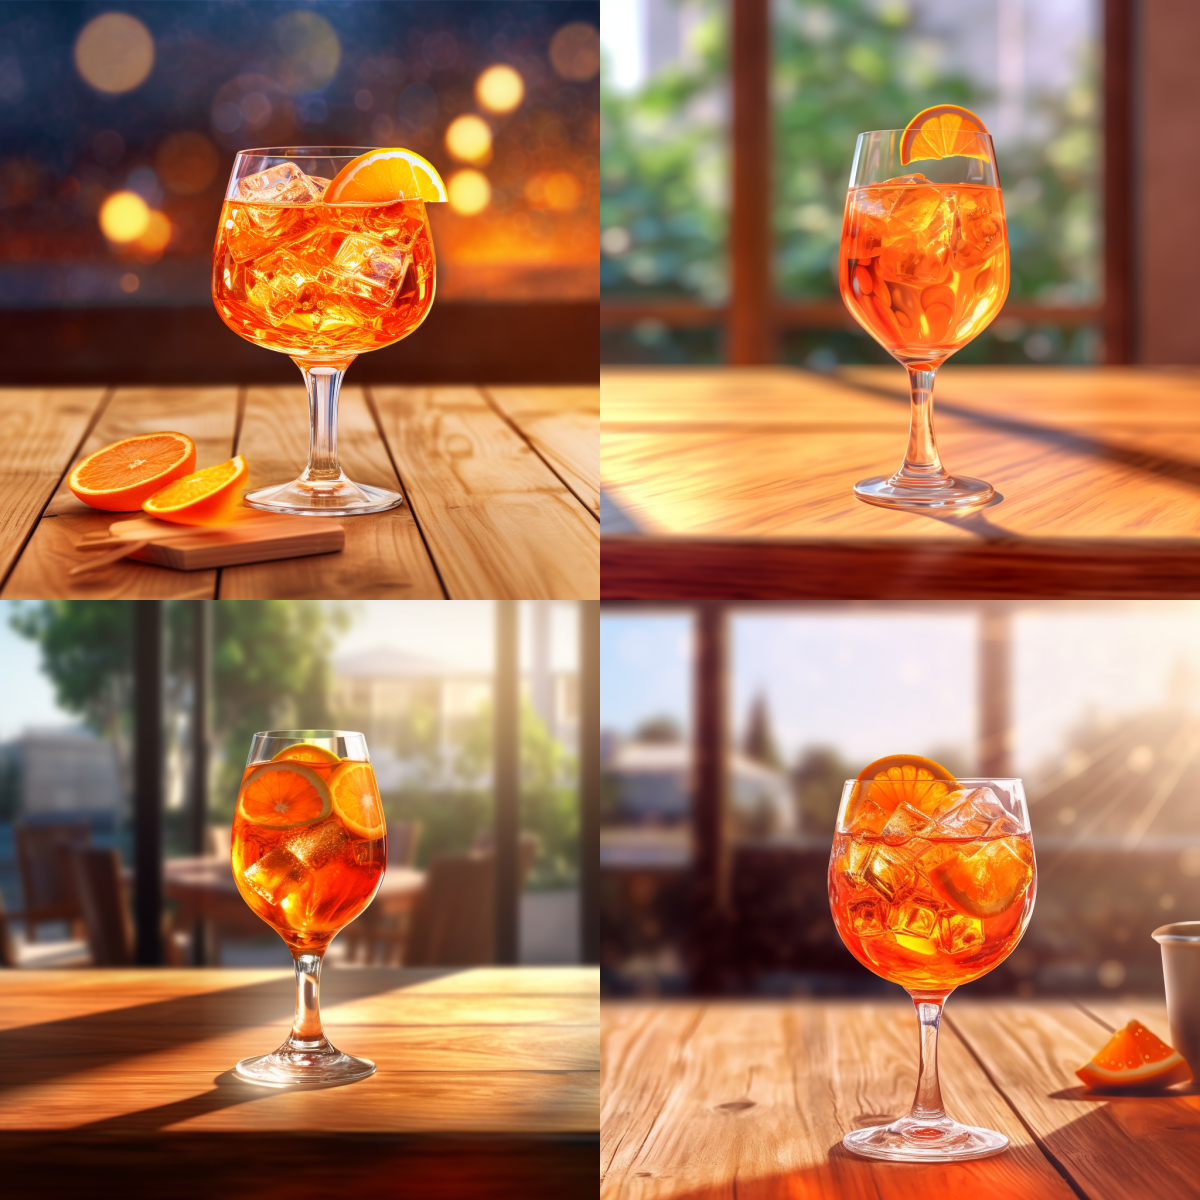 Senwater_aperol_spritz_on_a_wooden_table_empty_blurry_backgroun_be6b55e4-192c-41f0-872c-88b0f2263c25